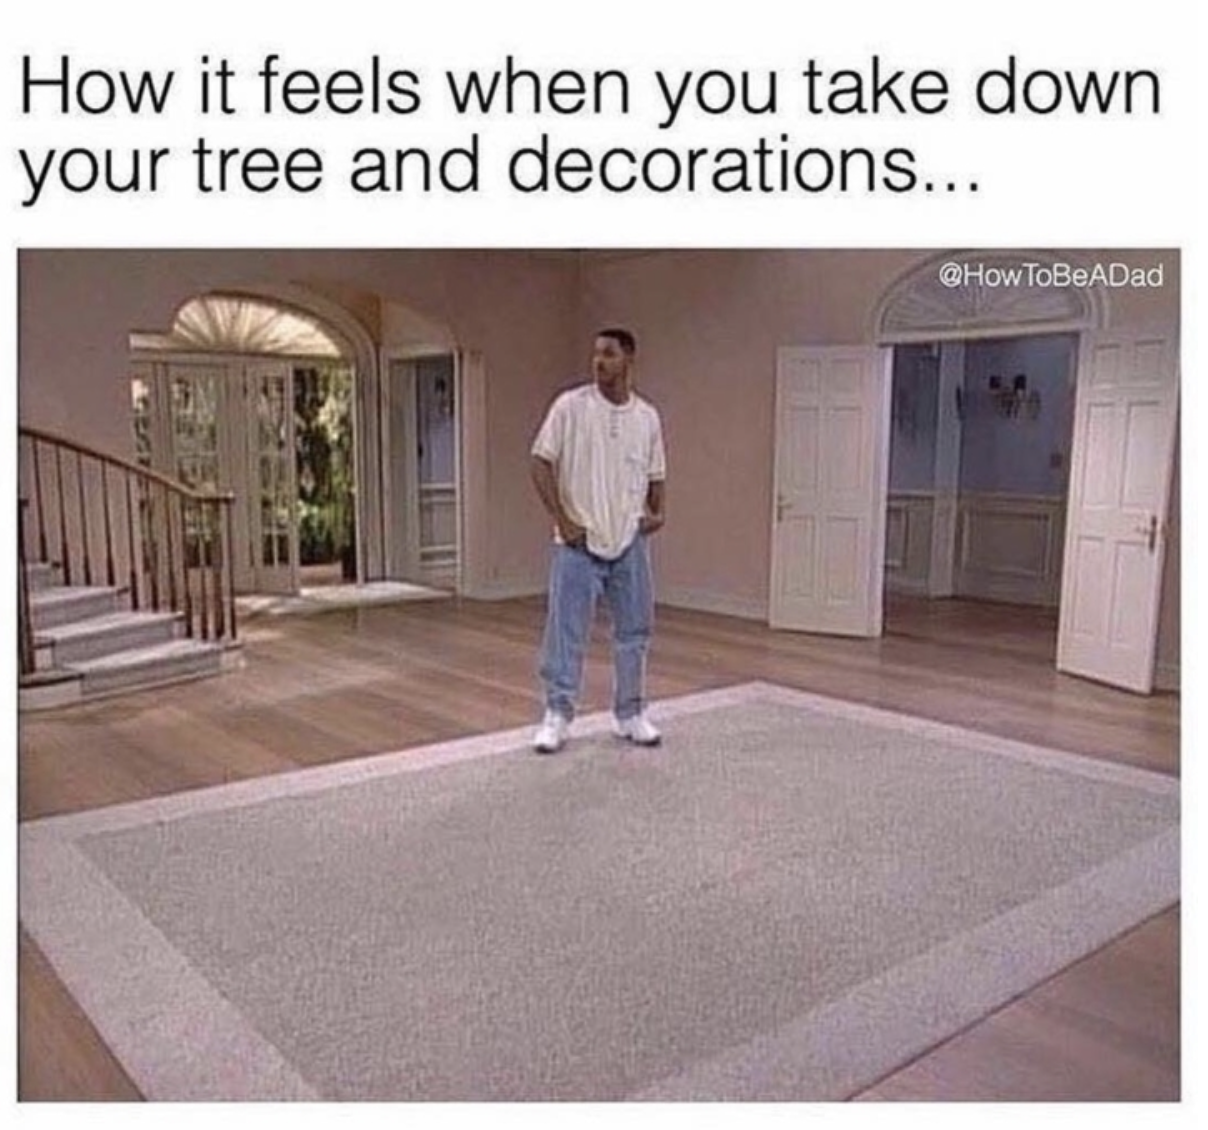 feels when you take down your christmas decorations - How it feels when you take down your tree and decorations...